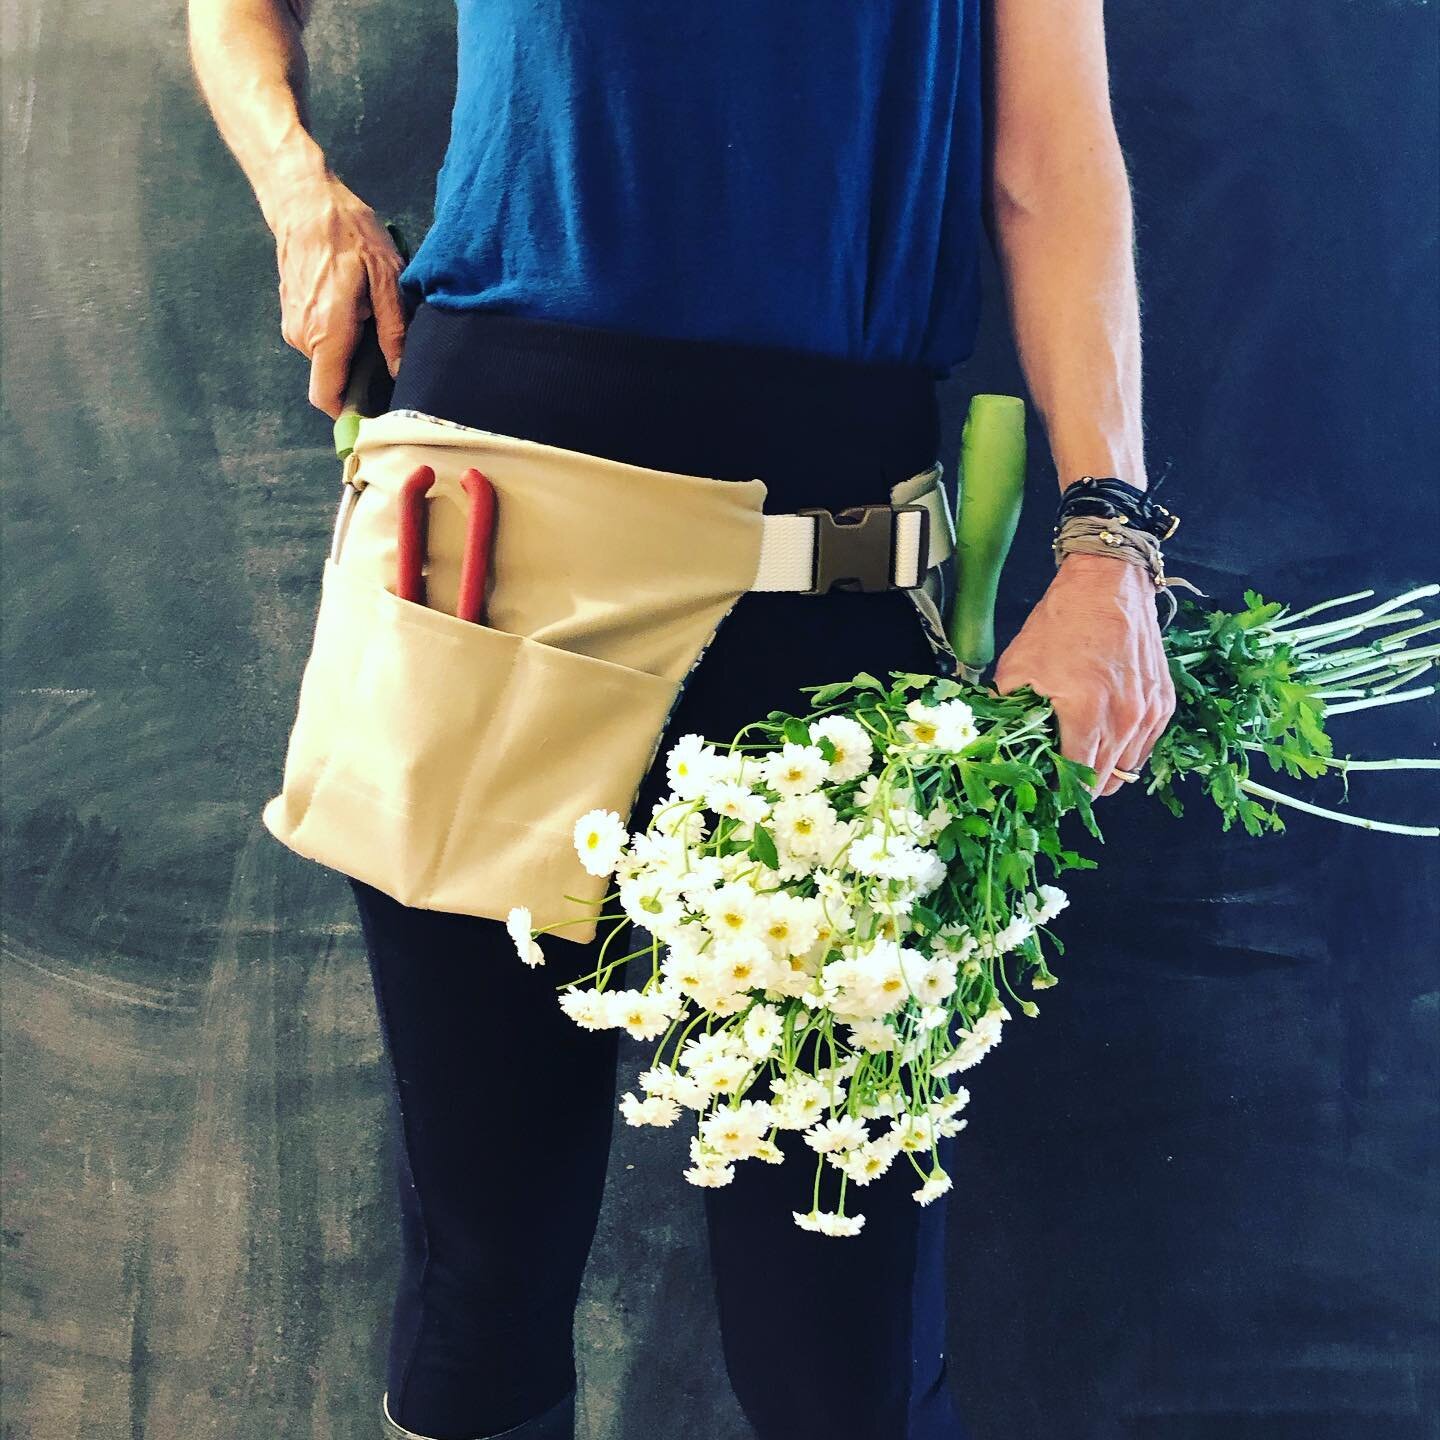 I designed and built a garden belt to keep all your essential tools close.  It&rsquo;s available for Mother&rsquo;s Day.  in Colorado in Jax McGuckin Hardware and Sturtz&amp;Copeland!! Check it out buy one for Mother&rsquo;s Day and happy gardening!!